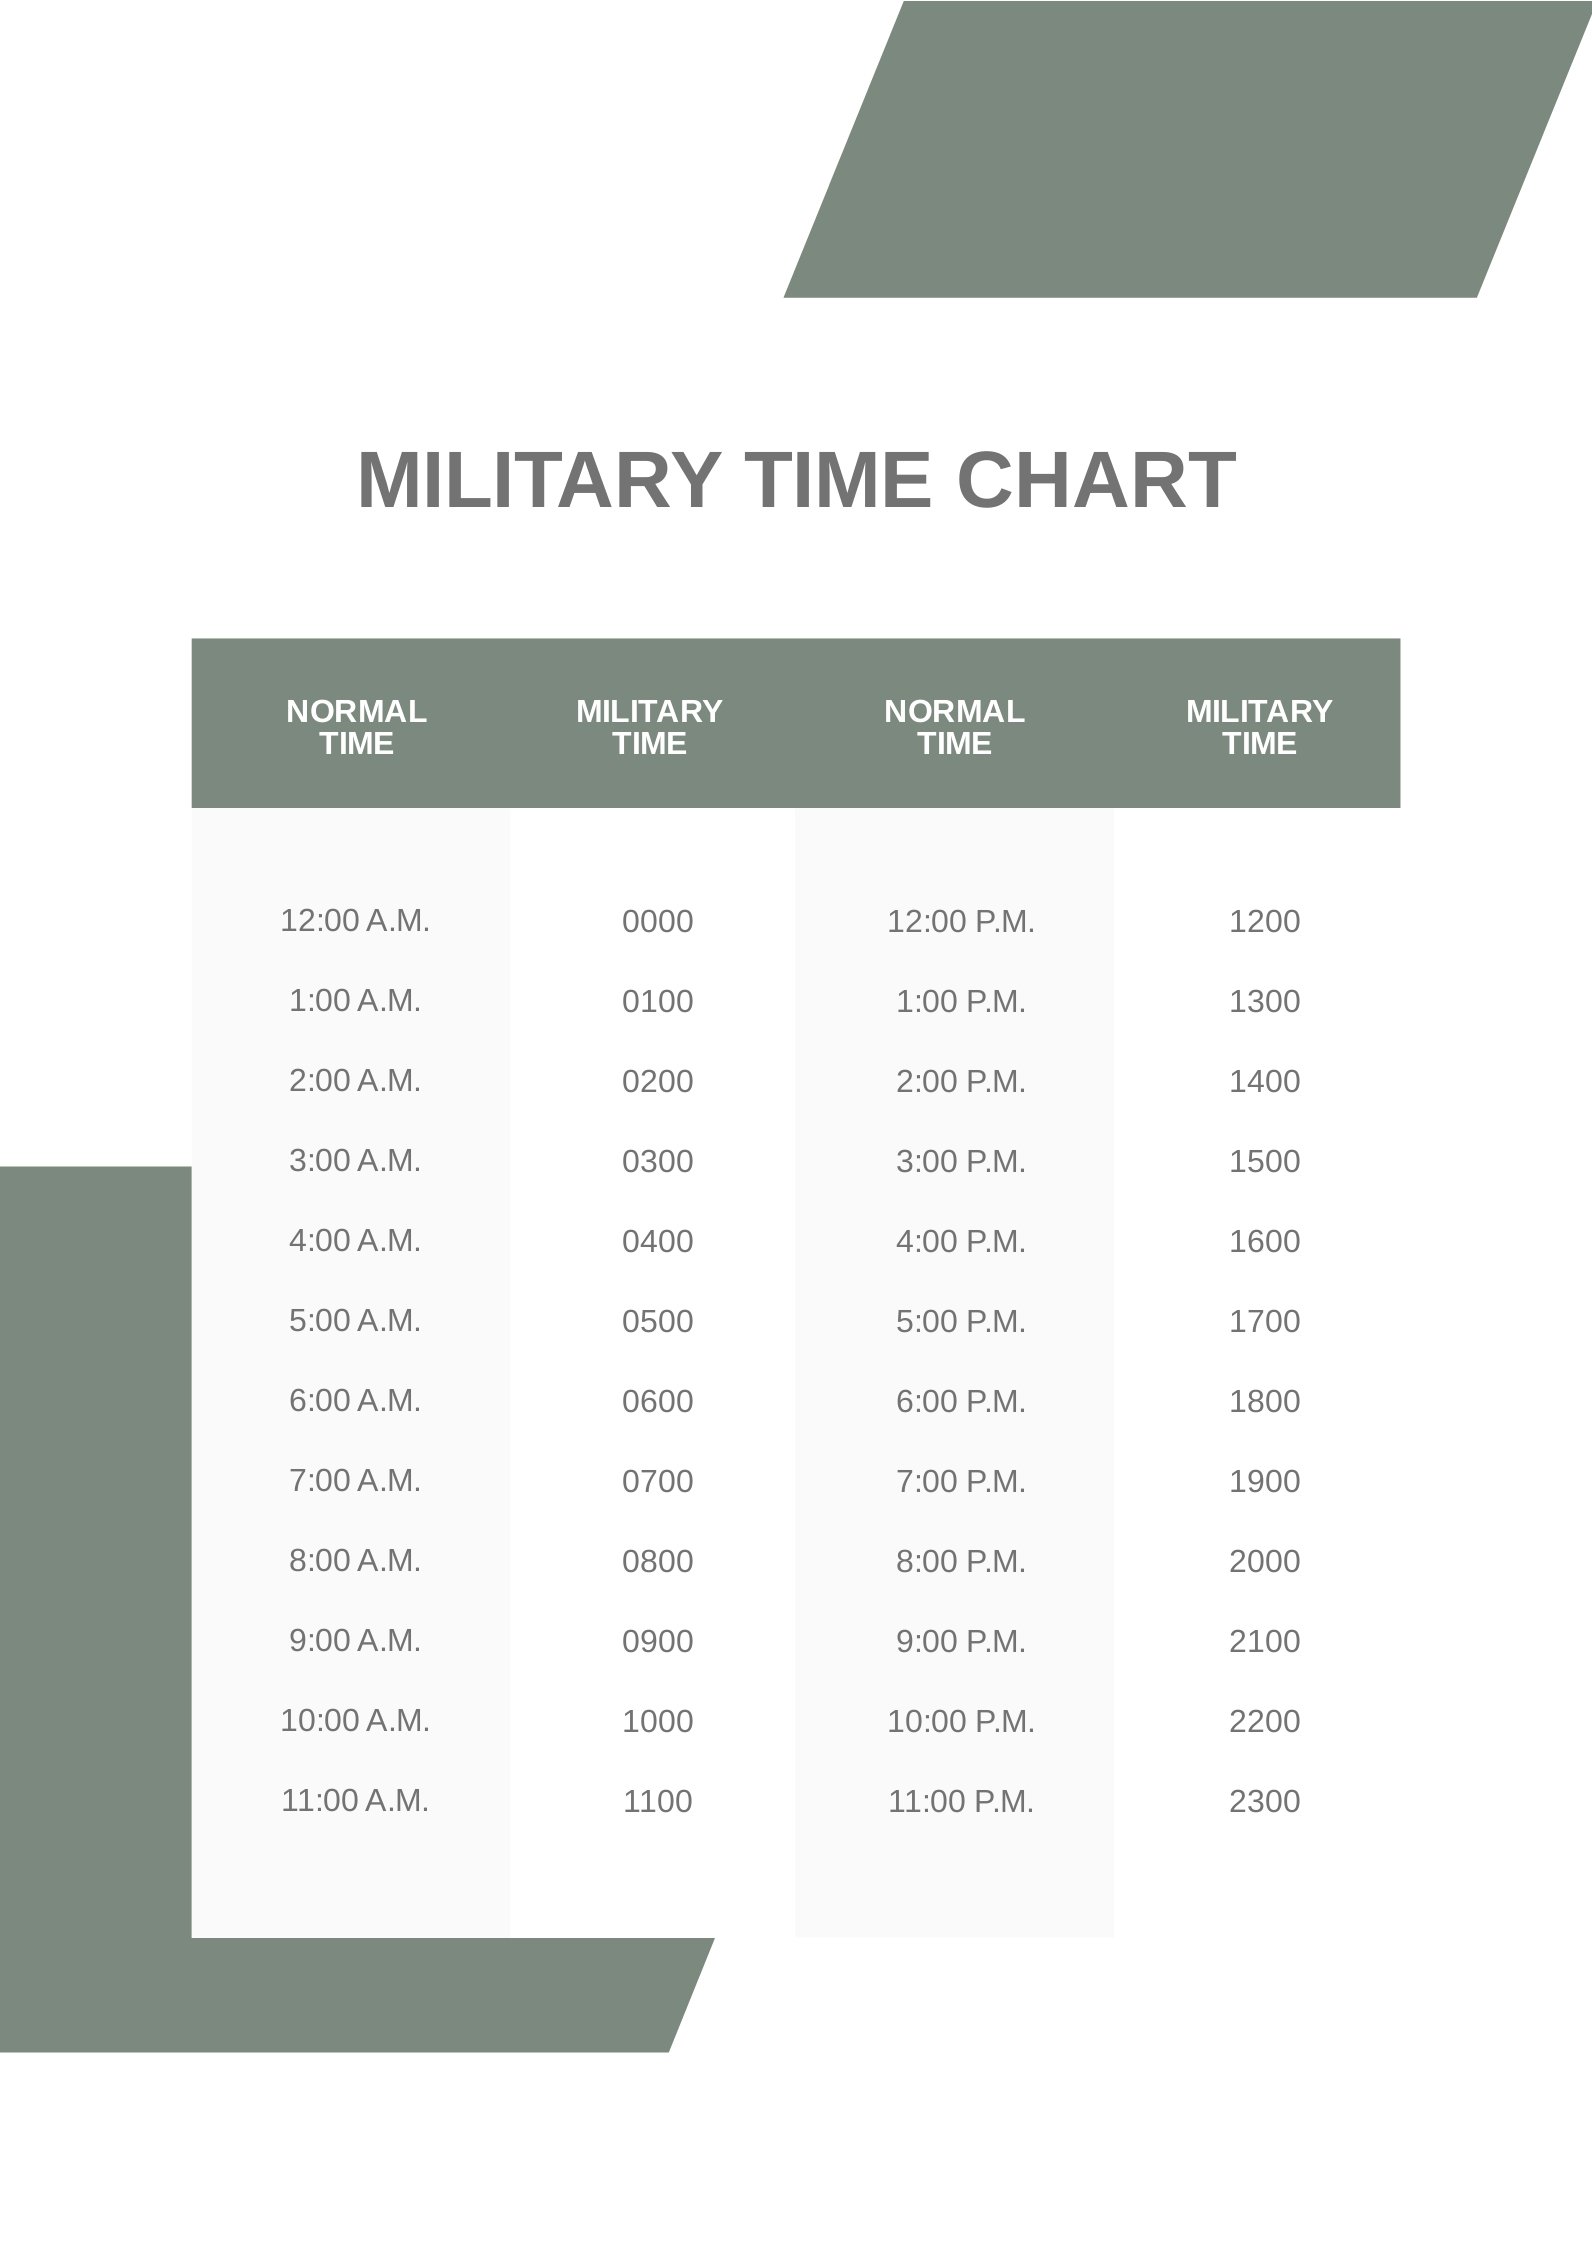 FREE Military Time Chart Template Download in PDF, Illustrator